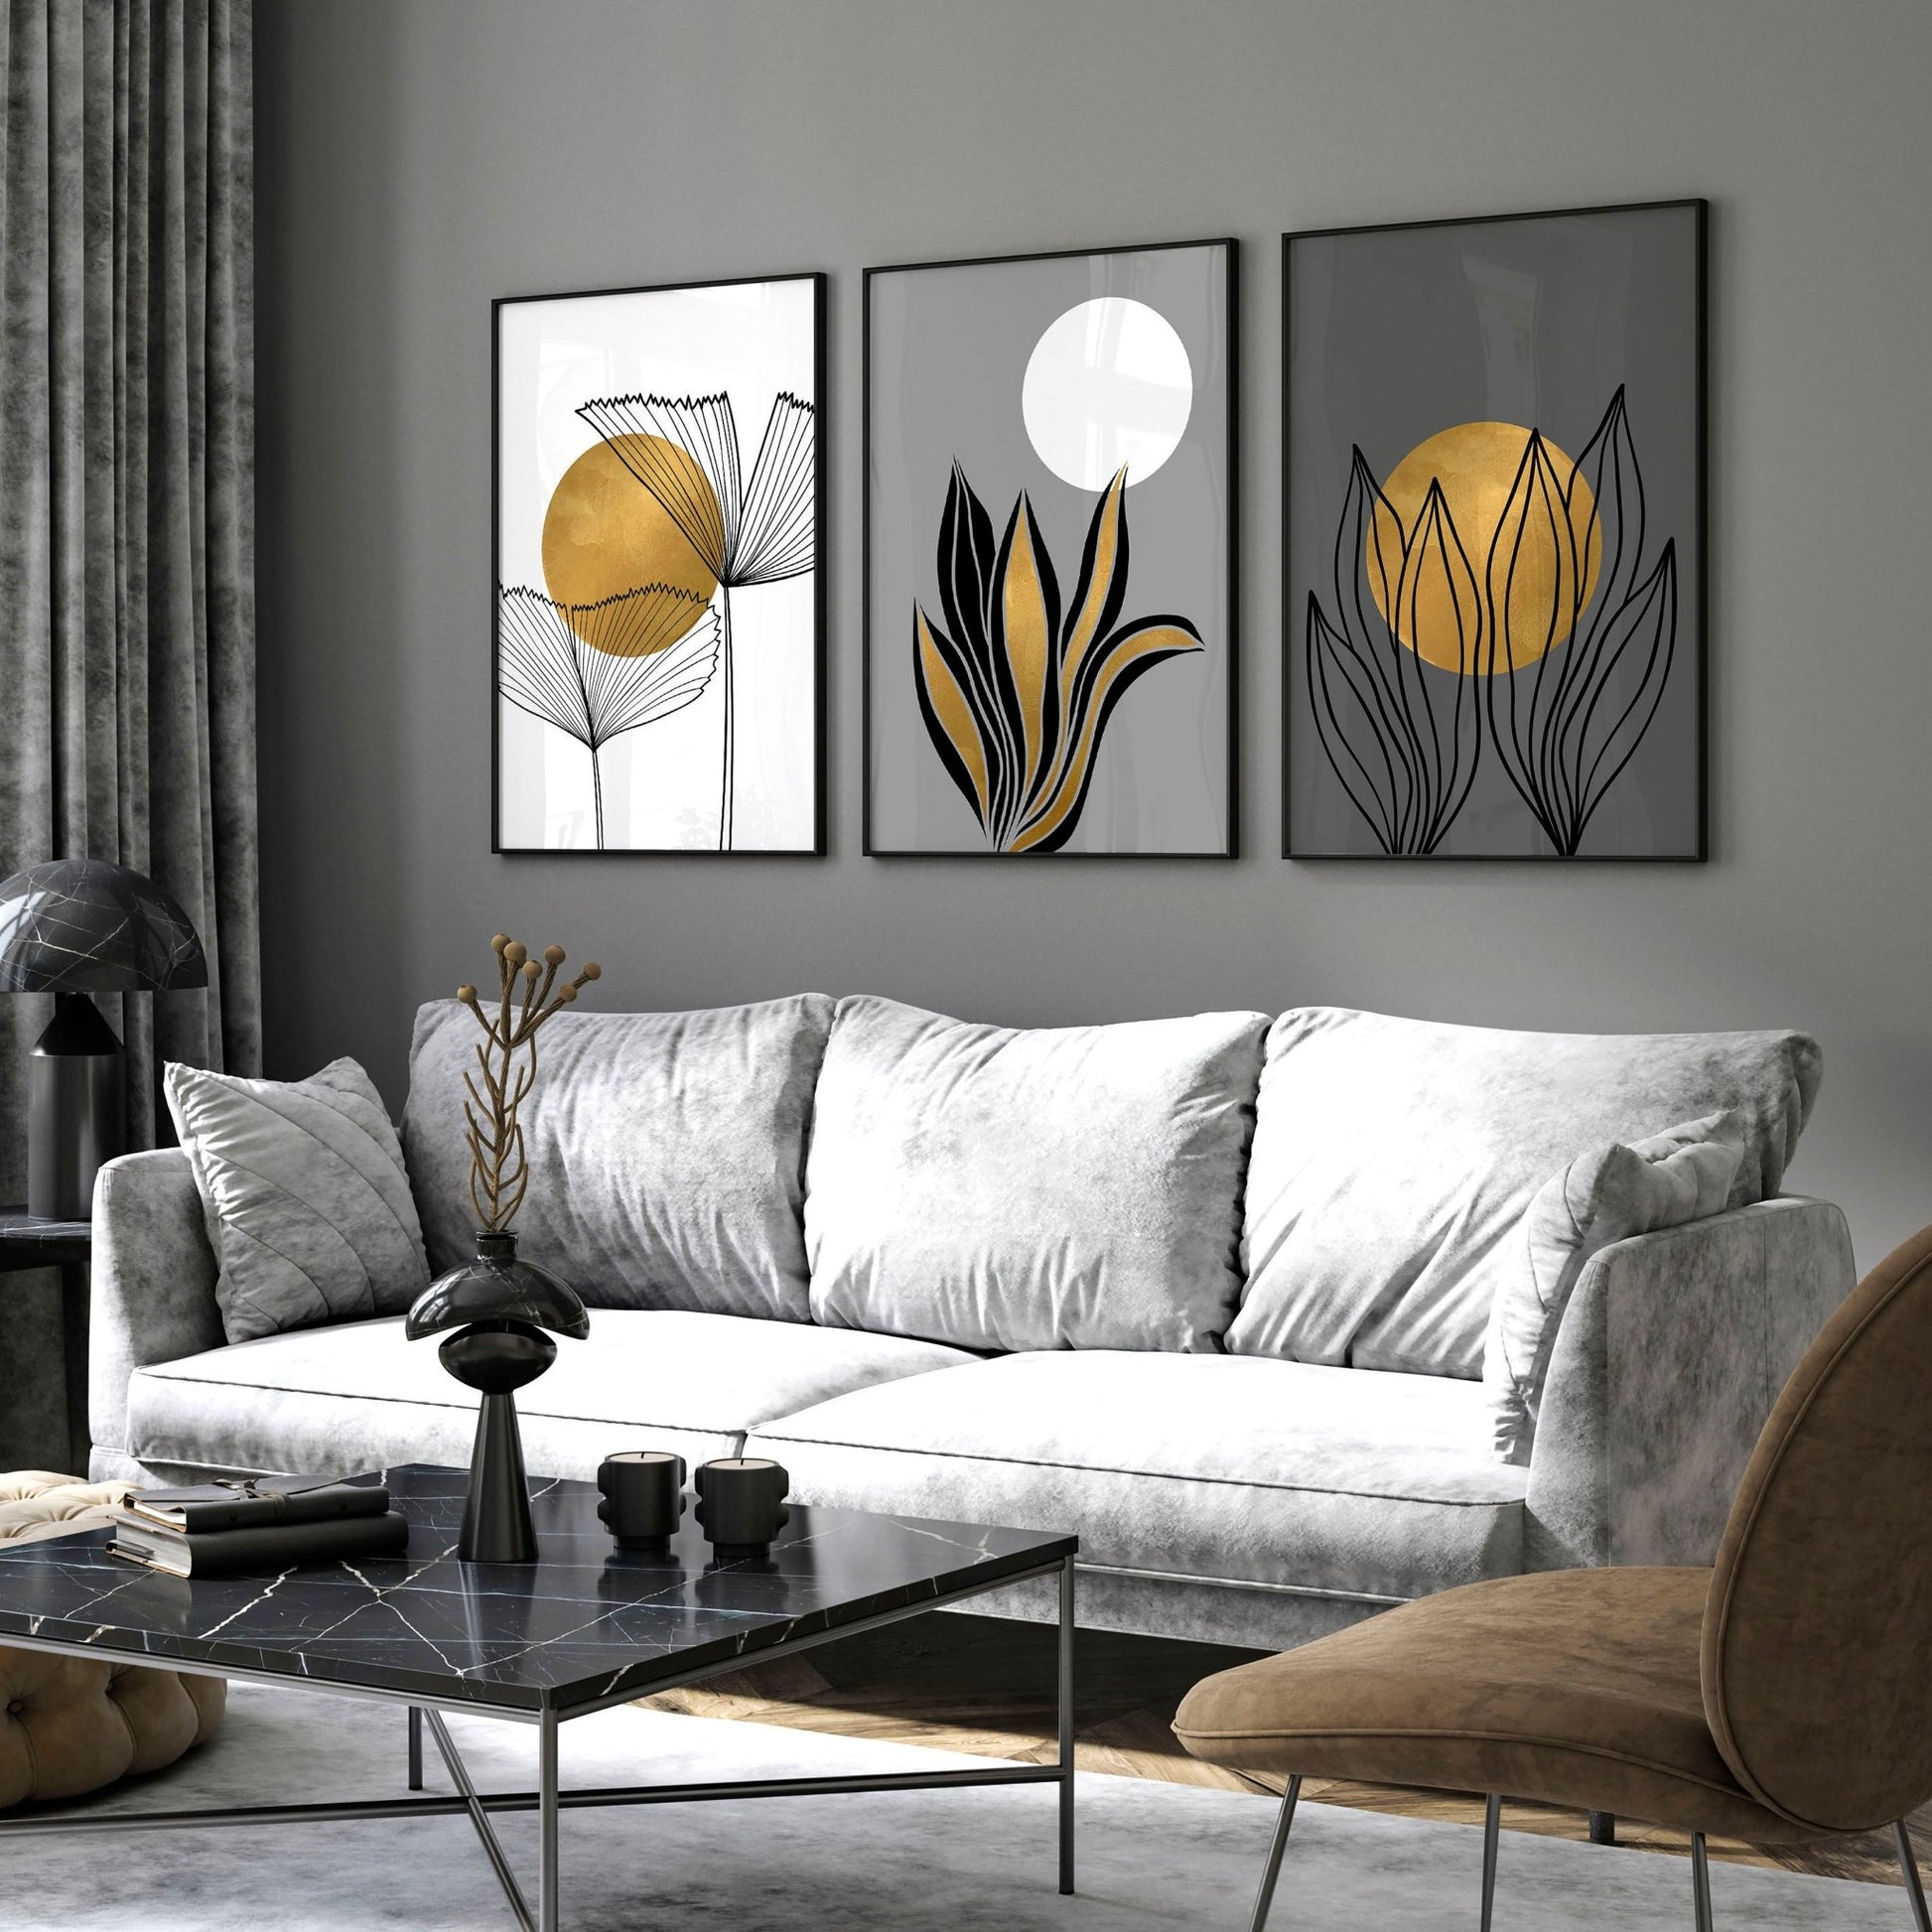 Wall decor ideas for hallway | set of 3 wall art prints - About Wall Art